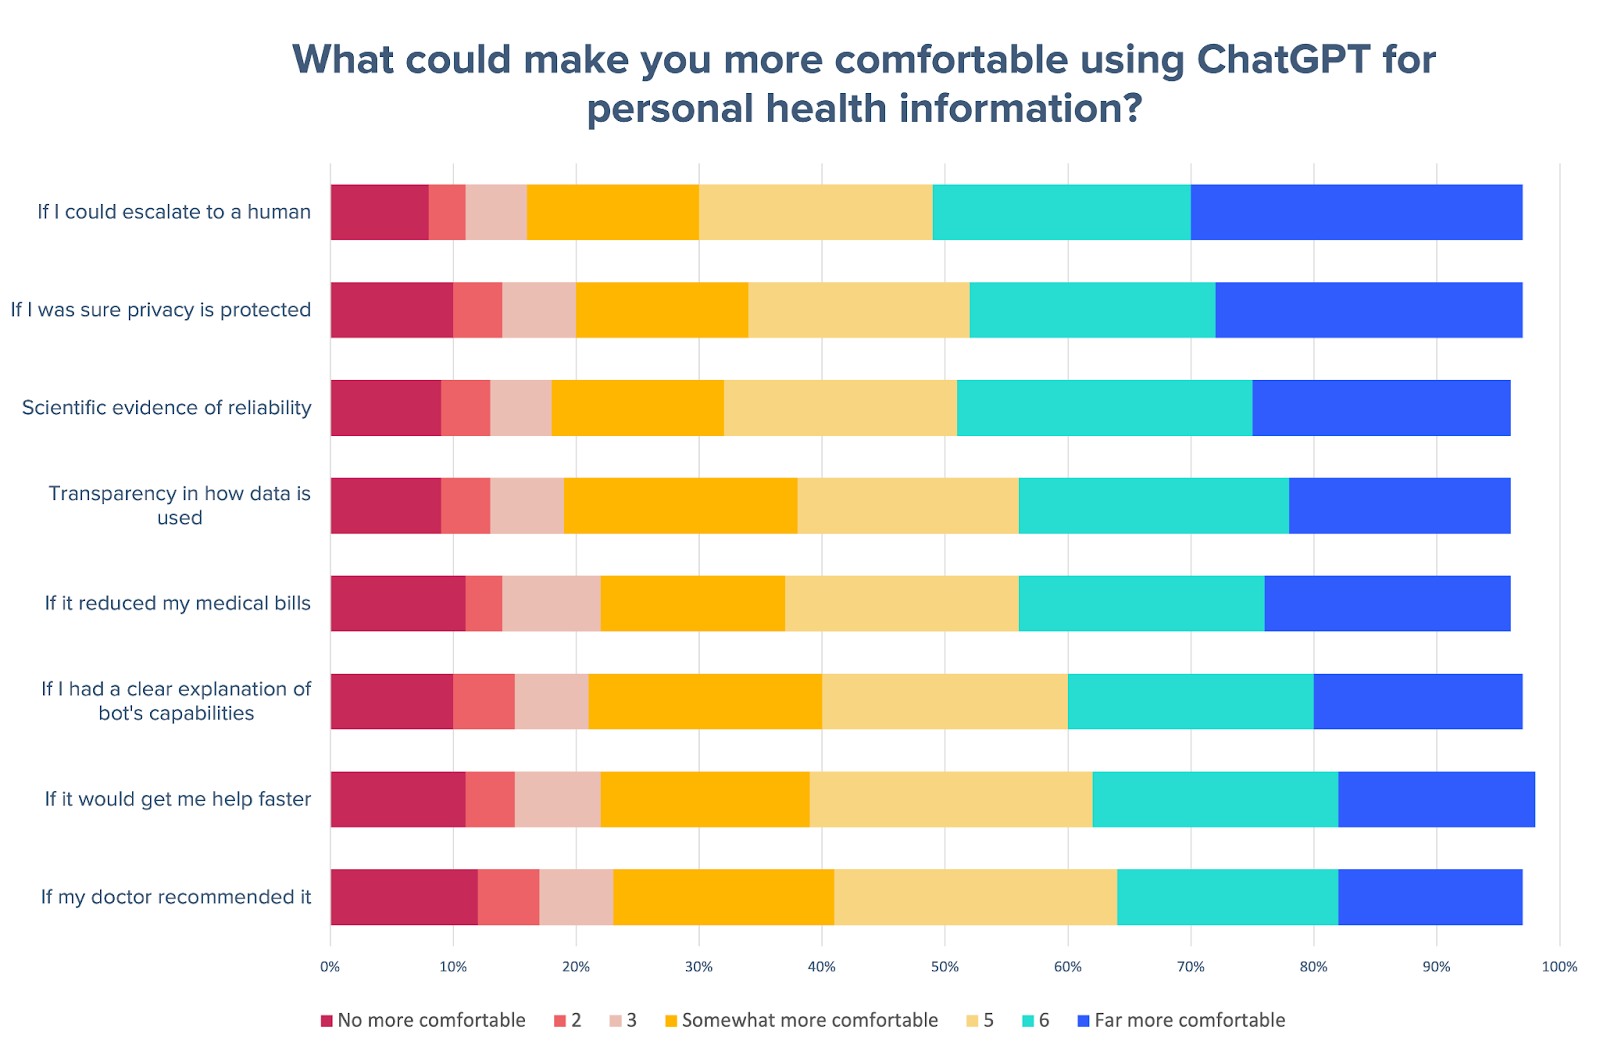 A chart listing the things that would make people more comfortable with ChatGPT in healthcare. Everythig helps, but the top responses are ability to escalate to a human, privacy protection, and scientific evidence of reliability.